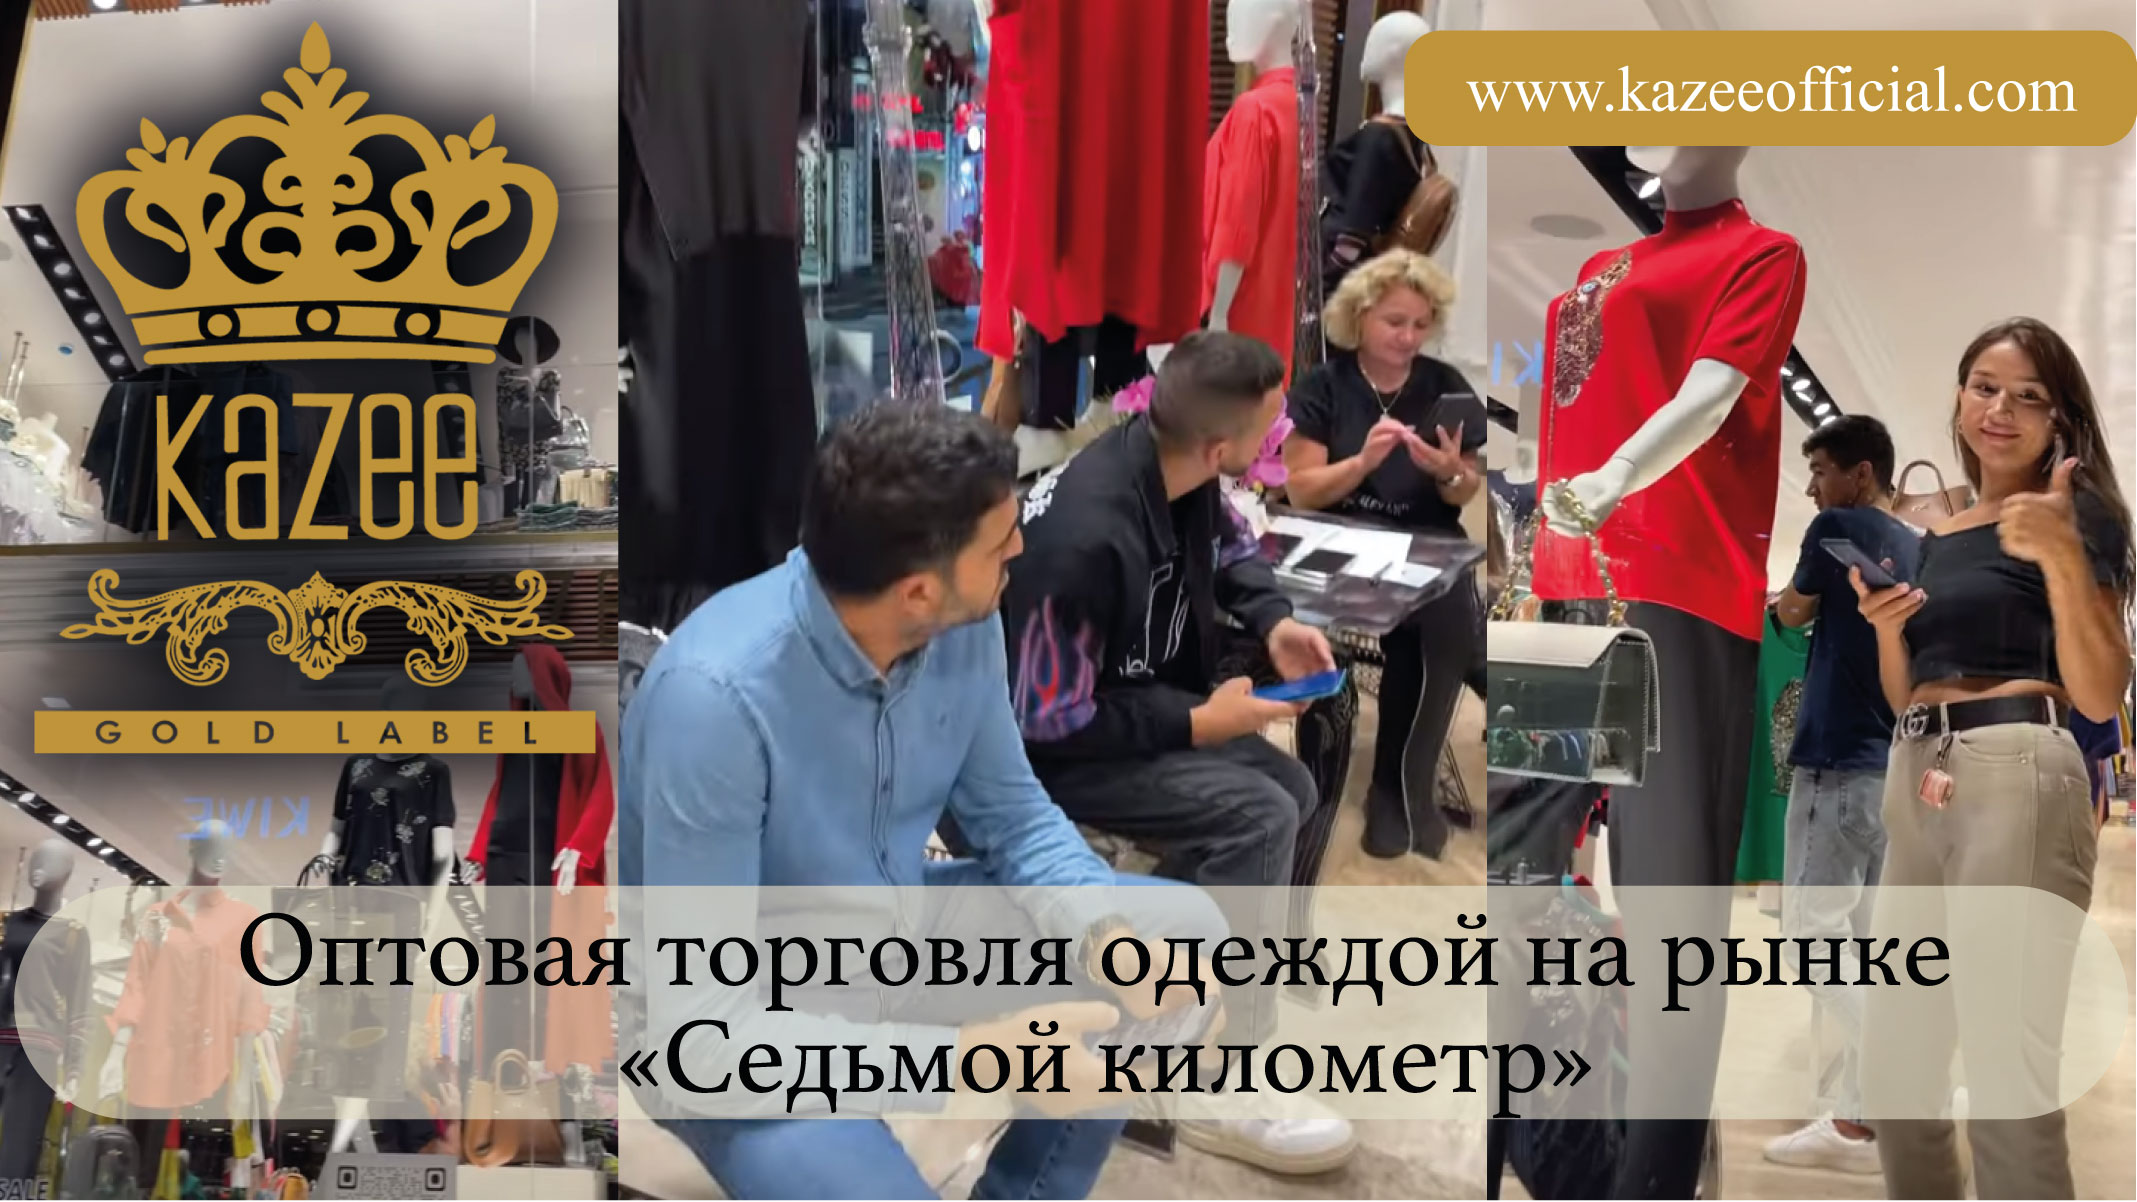 Wholesale of clothing at the Seventh Kilometer Market